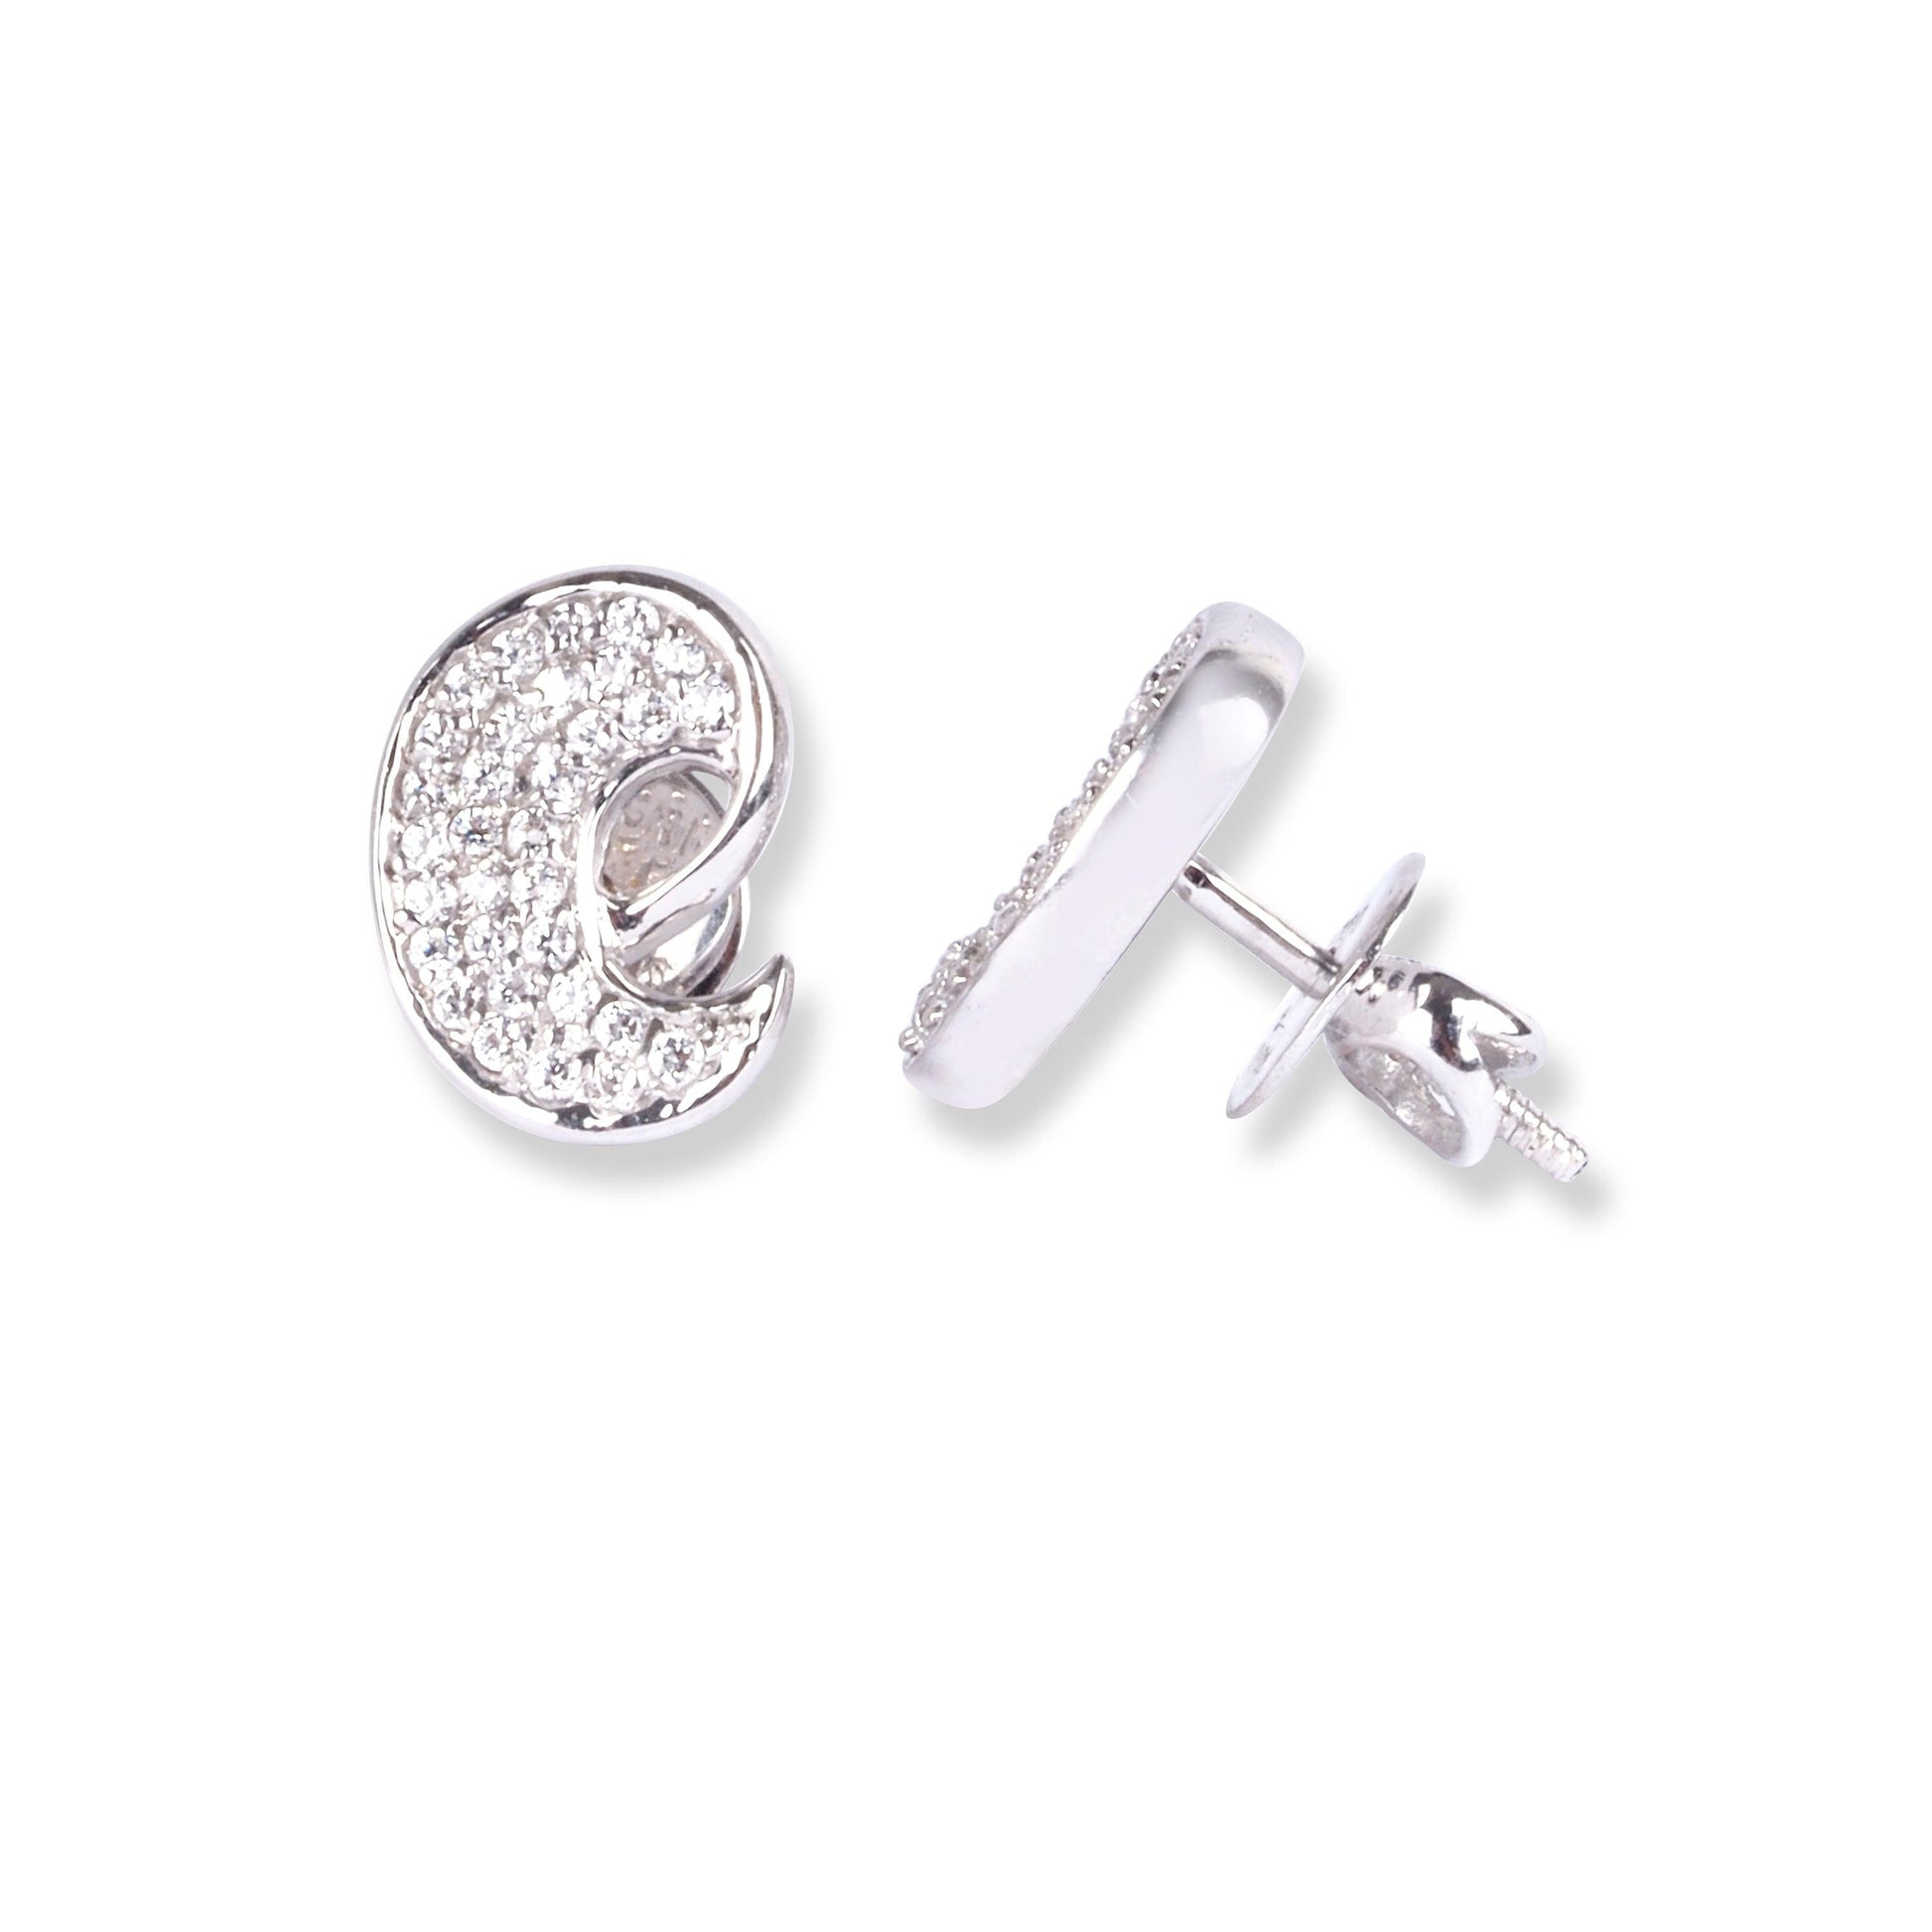 18ct White Gold Set with Cubic Zirconia Stones (Pendant + Chain + Stud Earrings) - Minar Jewellers